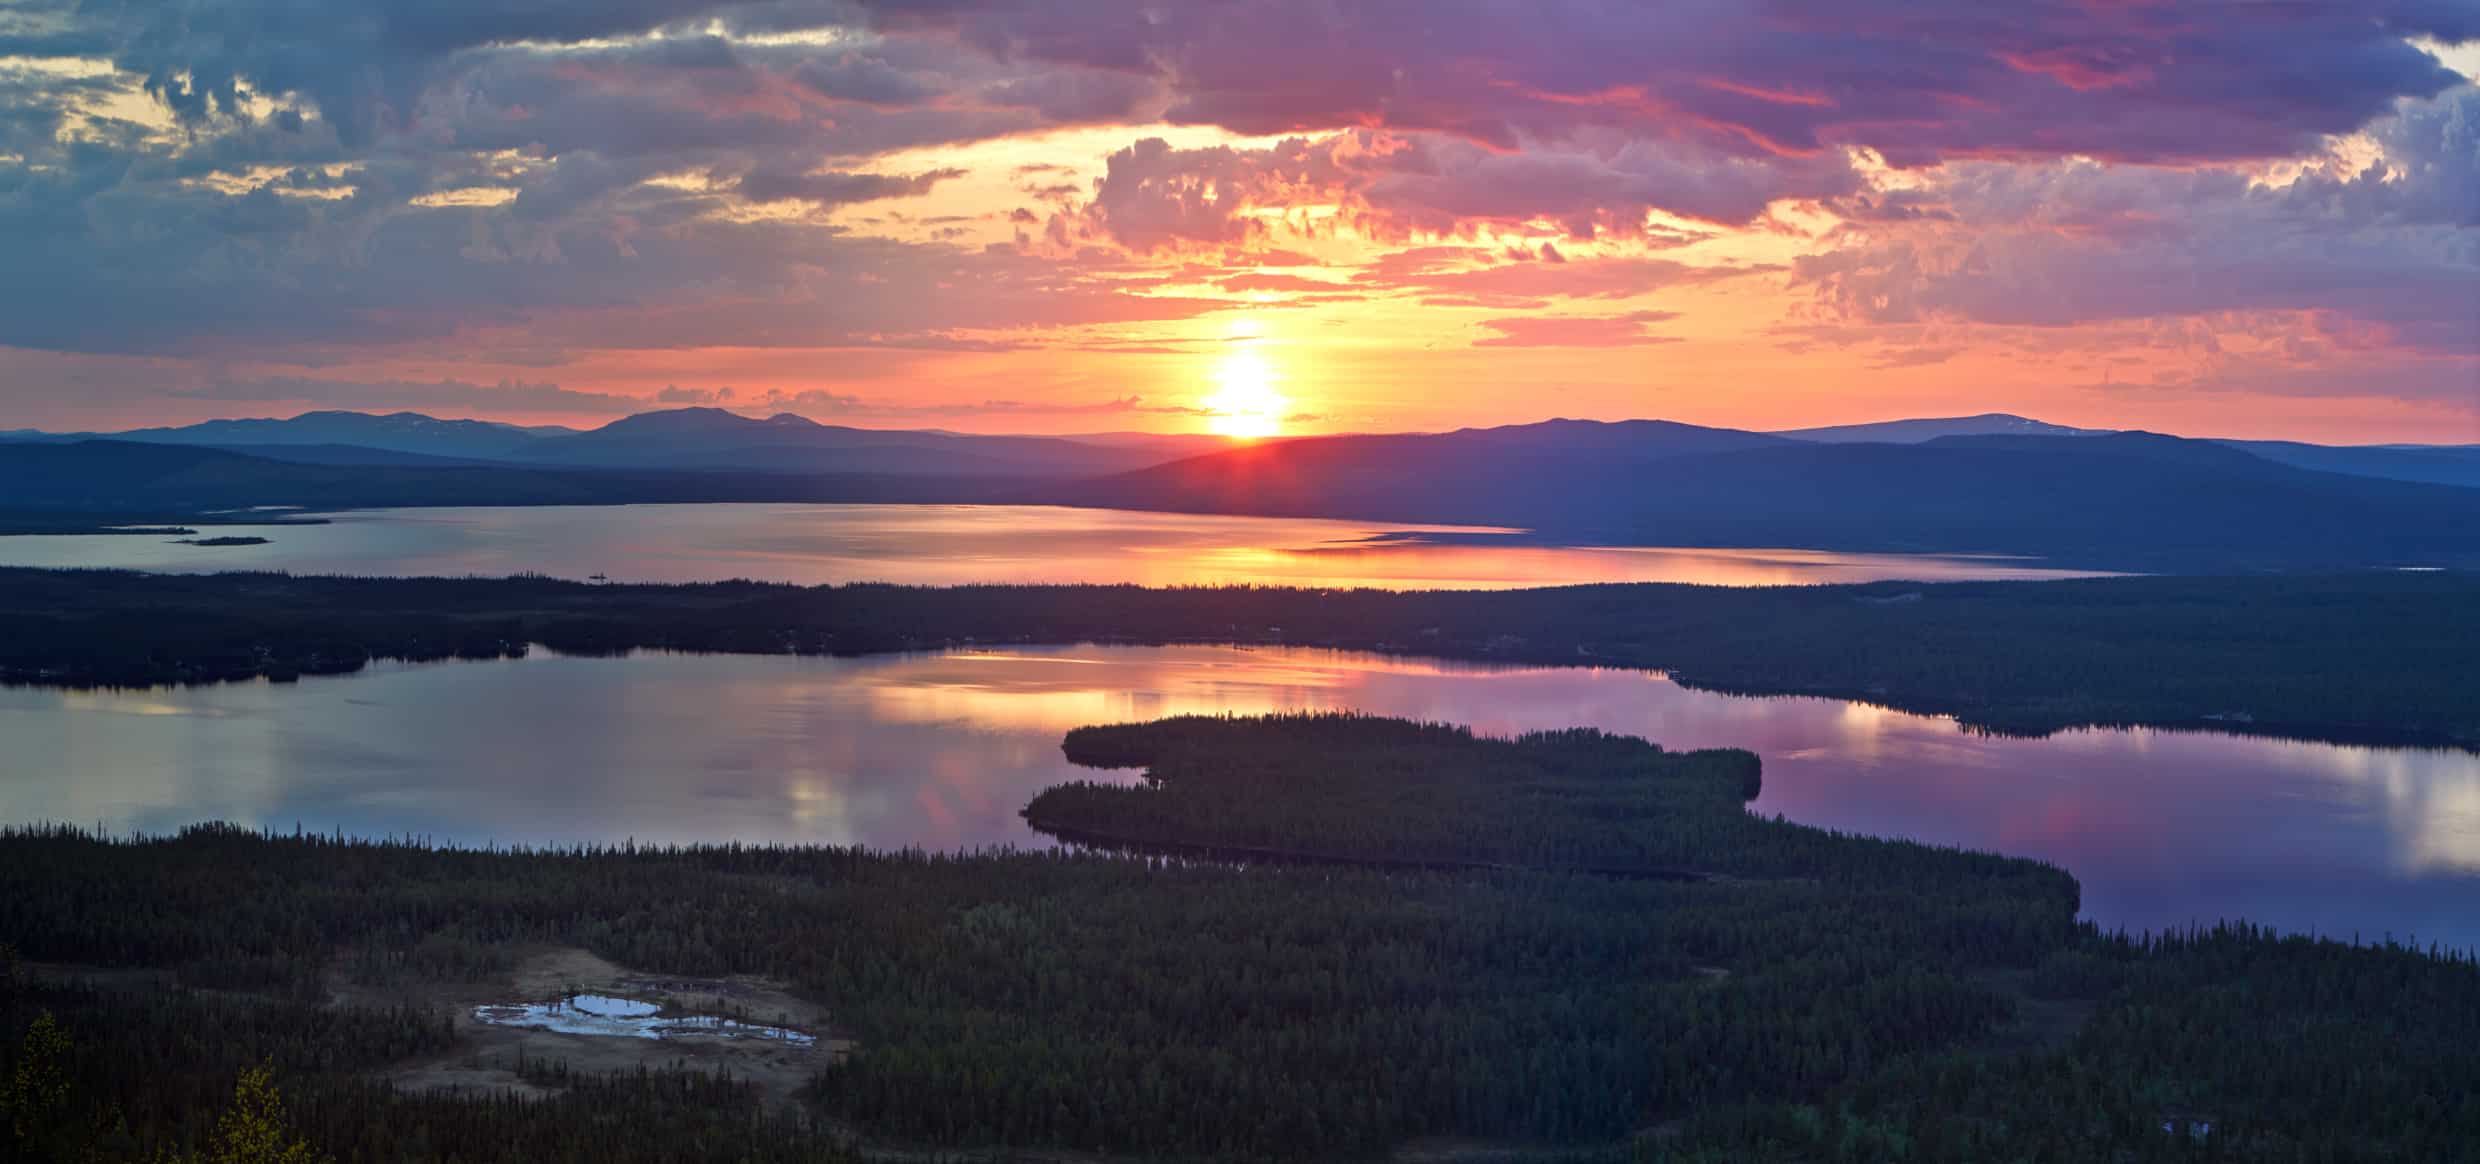 The Midnight Sun is a natural phenomenon occurring in summer months at latitudes north of the Arctic Circle where the sun remains visible at local midnight.